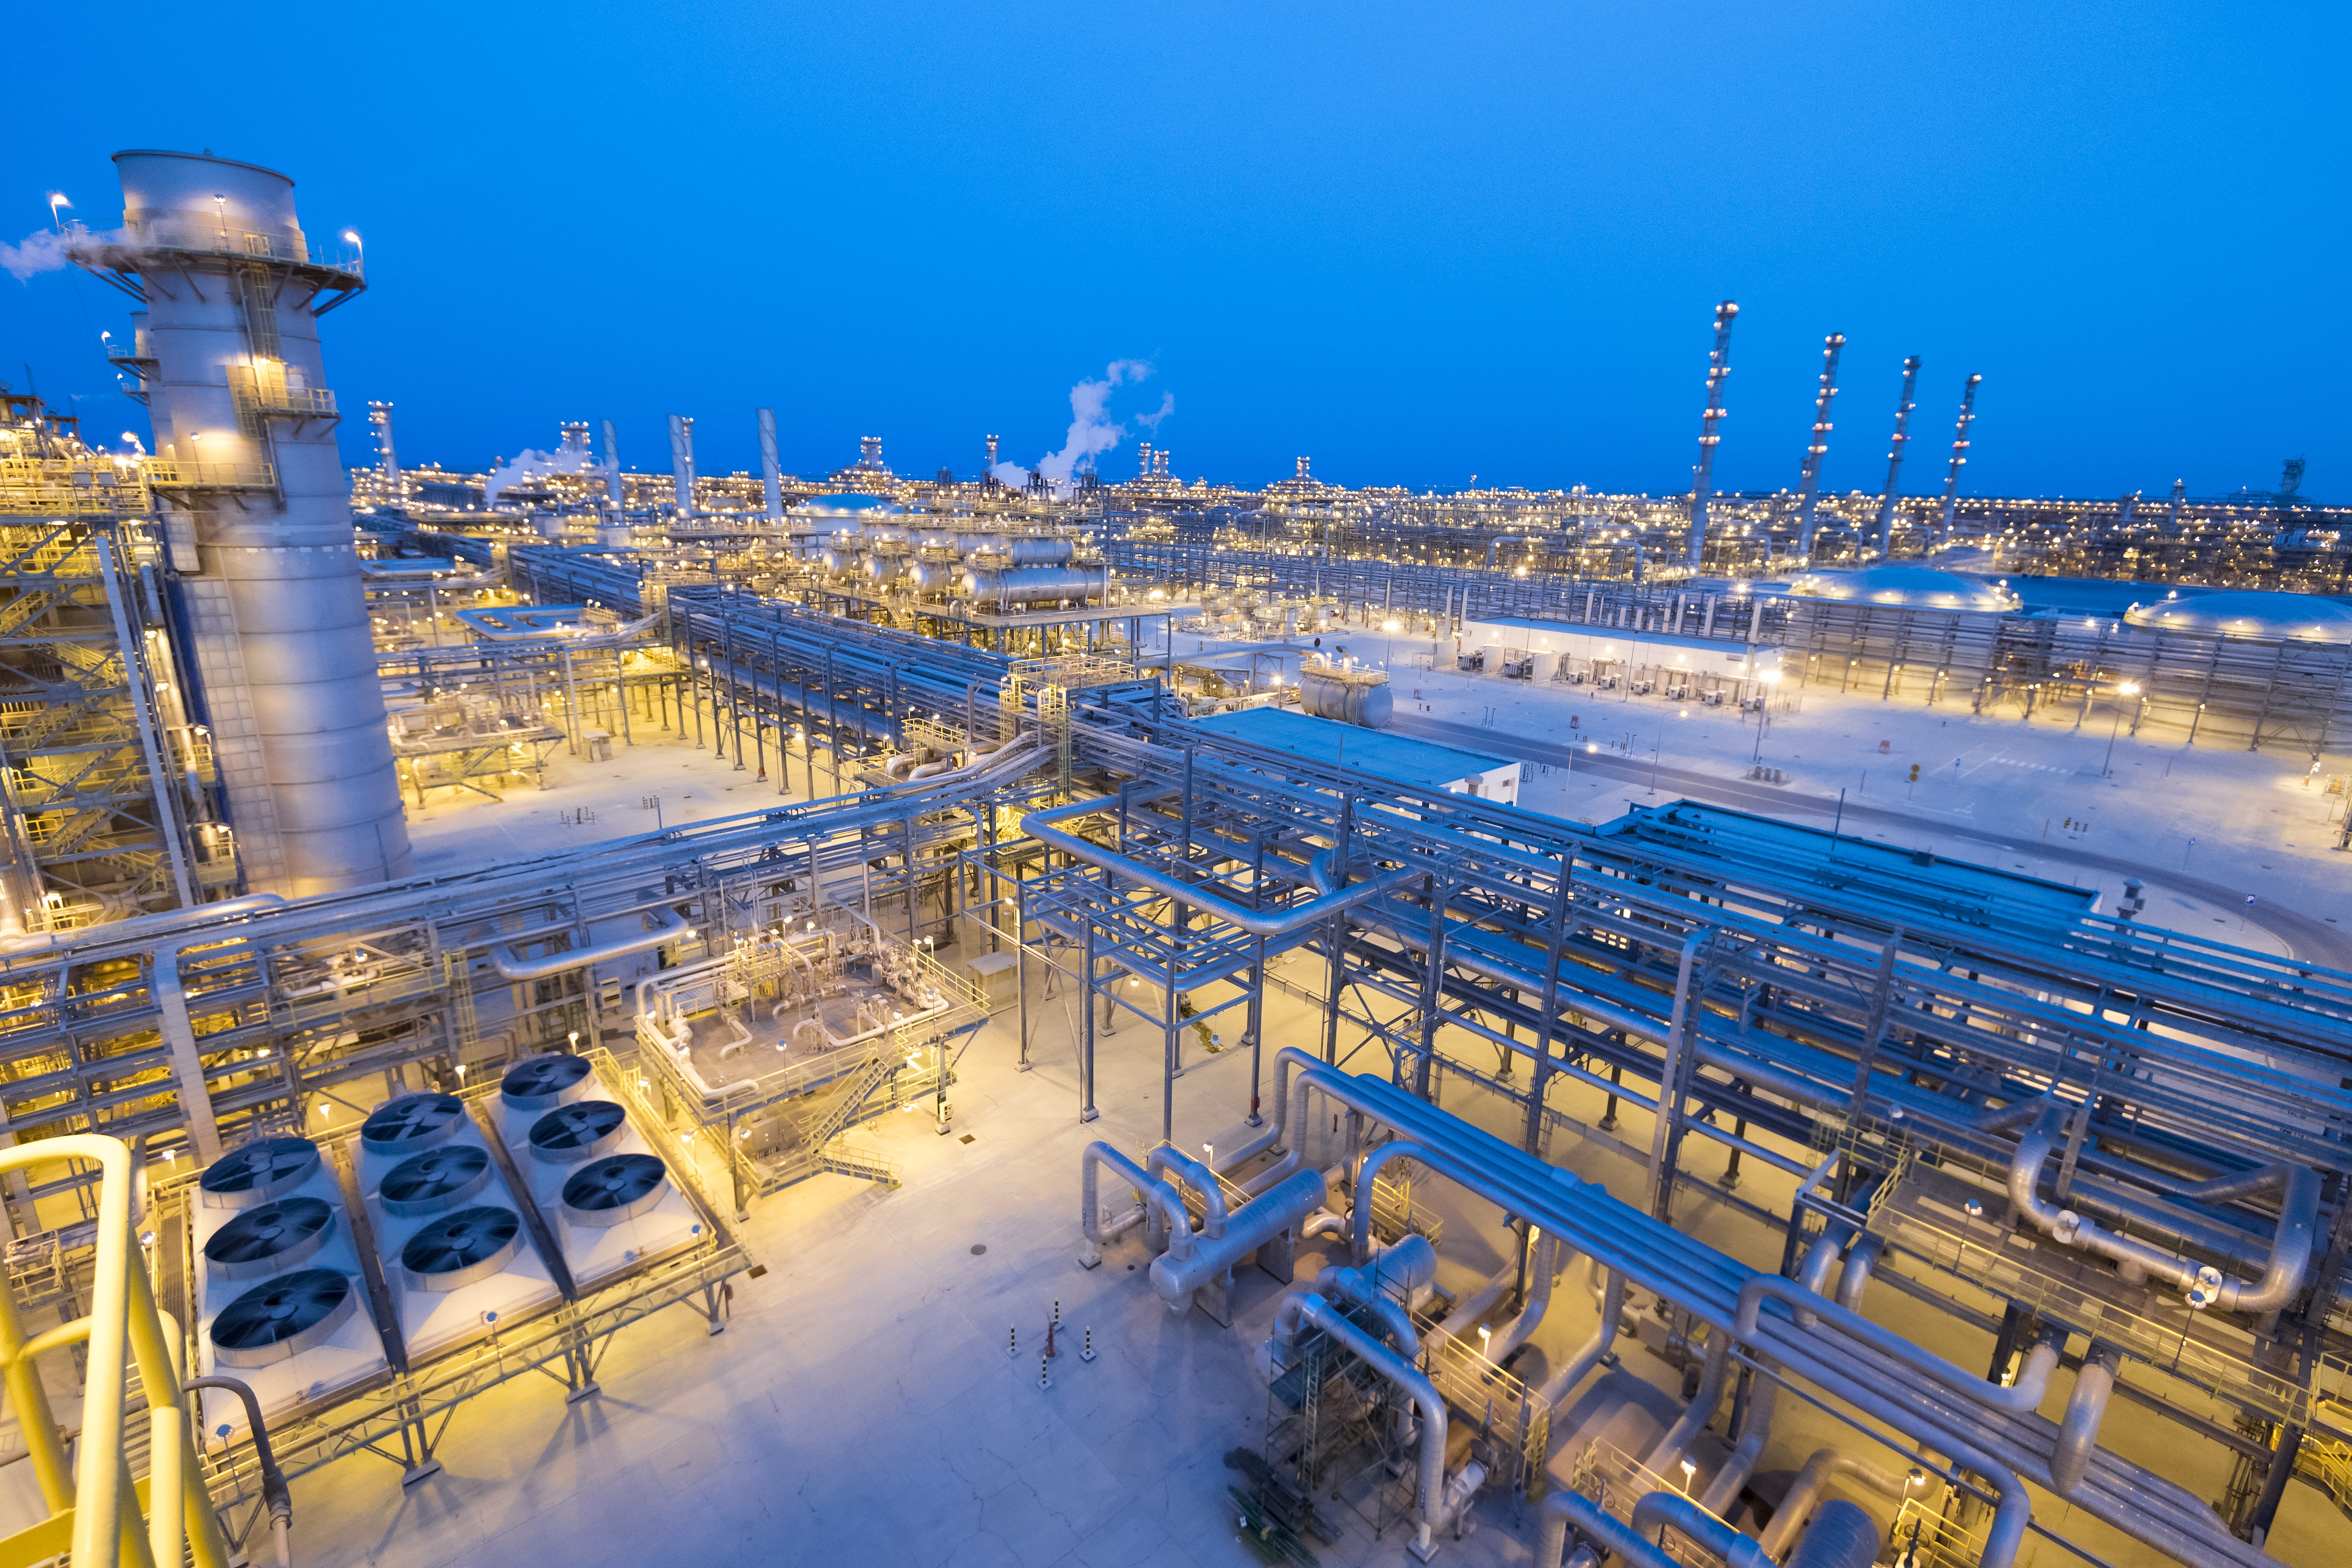 Wasit gas production plant at night